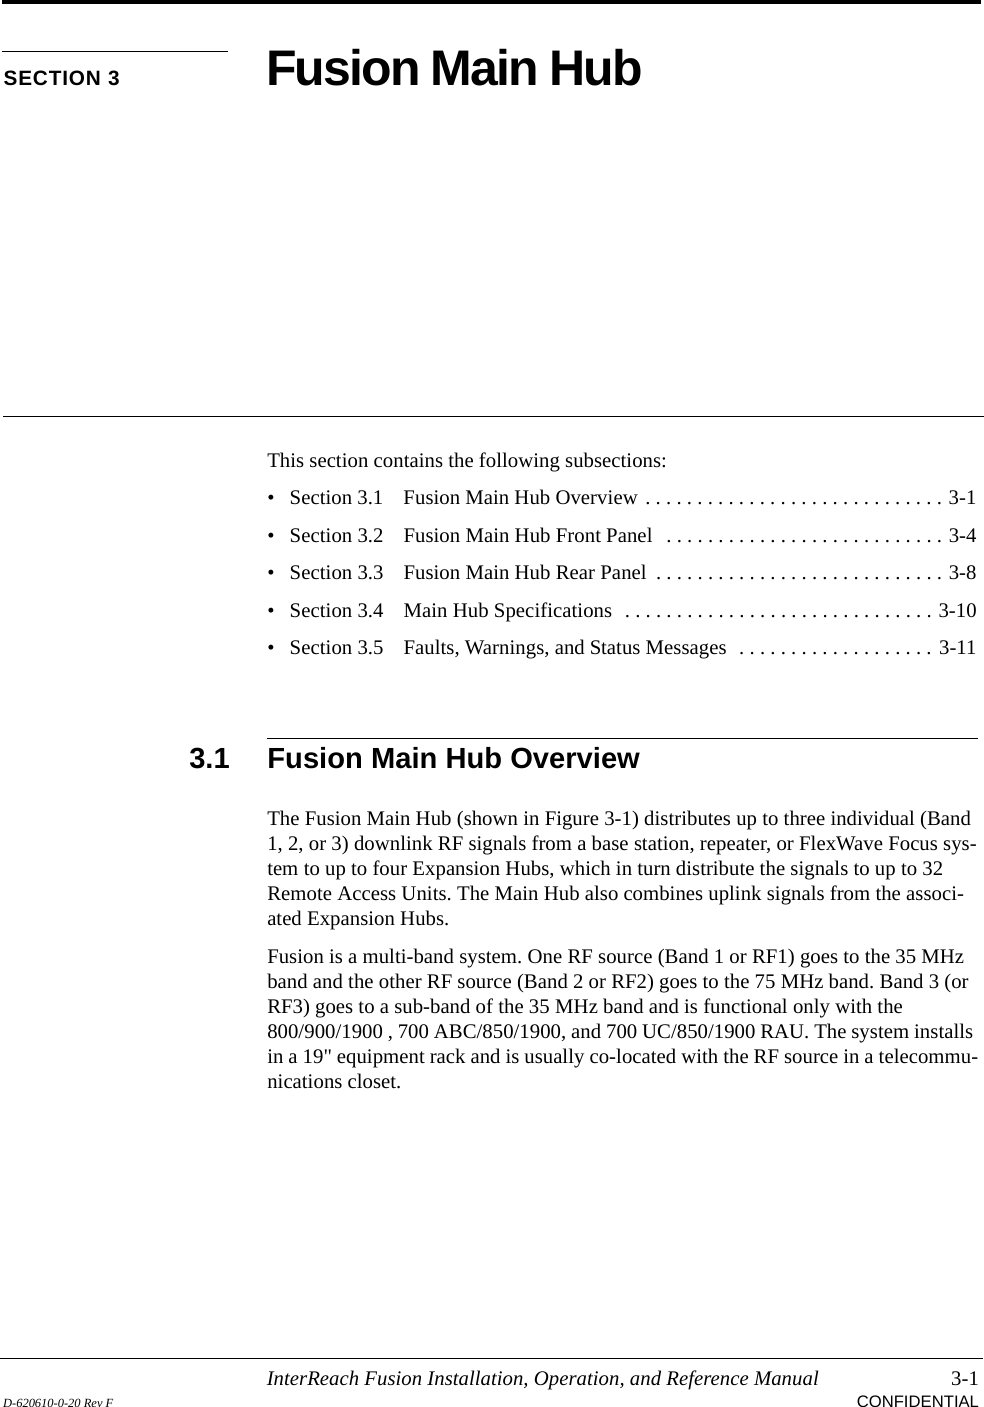 InterReach Fusion Installation, Operation, and Reference Manual 3-1D-620610-0-20 Rev F CONFIDENTIALSECTION 3 Fusion Main HubThis section contains the following subsections:• Section 3.1   Fusion Main Hub Overview . . . . . . . . . . . . . . . . . . . . . . . . . . . . . 3-1• Section 3.2   Fusion Main Hub Front Panel  . . . . . . . . . . . . . . . . . . . . . . . . . . . 3-4• Section 3.3   Fusion Main Hub Rear Panel  . . . . . . . . . . . . . . . . . . . . . . . . . . . . 3-8• Section 3.4   Main Hub Specifications  . . . . . . . . . . . . . . . . . . . . . . . . . . . . . . 3-10• Section 3.5   Faults, Warnings, and Status Messages  . . . . . . . . . . . . . . . . . . . 3-113.1 Fusion Main Hub OverviewThe Fusion Main Hub (shown in Figure 3-1) distributes up to three individual (Band 1, 2, or 3) downlink RF signals from a base station, repeater, or FlexWave Focus sys-tem to up to four Expansion Hubs, which in turn distribute the signals to up to 32 Remote Access Units. The Main Hub also combines uplink signals from the associ-ated Expansion Hubs.Fusion is a multi-band system. One RF source (Band 1 or RF1) goes to the 35 MHz band and the other RF source (Band 2 or RF2) goes to the 75 MHz band. Band 3 (or RF3) goes to a sub-band of the 35 MHz band and is functional only with the 800/900/1900 , 700 ABC/850/1900, and 700 UC/850/1900 RAU. The system installs in a 19&quot; equipment rack and is usually co-located with the RF source in a telecommu-nications closet.